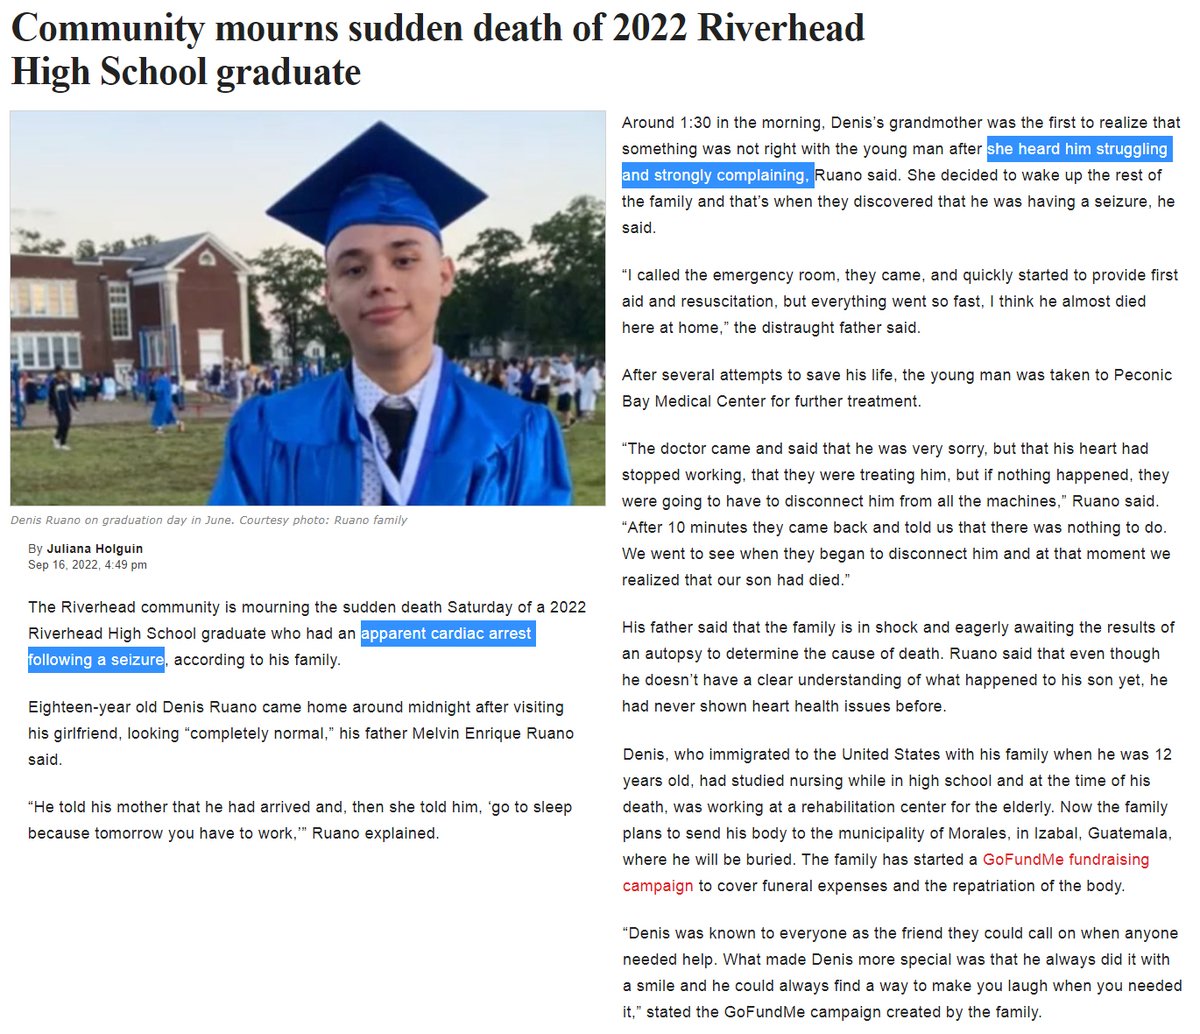 Riverhead, NY - 18 year old Denis Ruano, Riverhead High School graduate 

had a seizure, then a cardiac arrest & died suddenly Sep.16, 2022.

'his heart had stopped working'
'had never shown heart health issues before'

COVID-19 mRNA Vaccine status is key here.
#DiedSuddenly